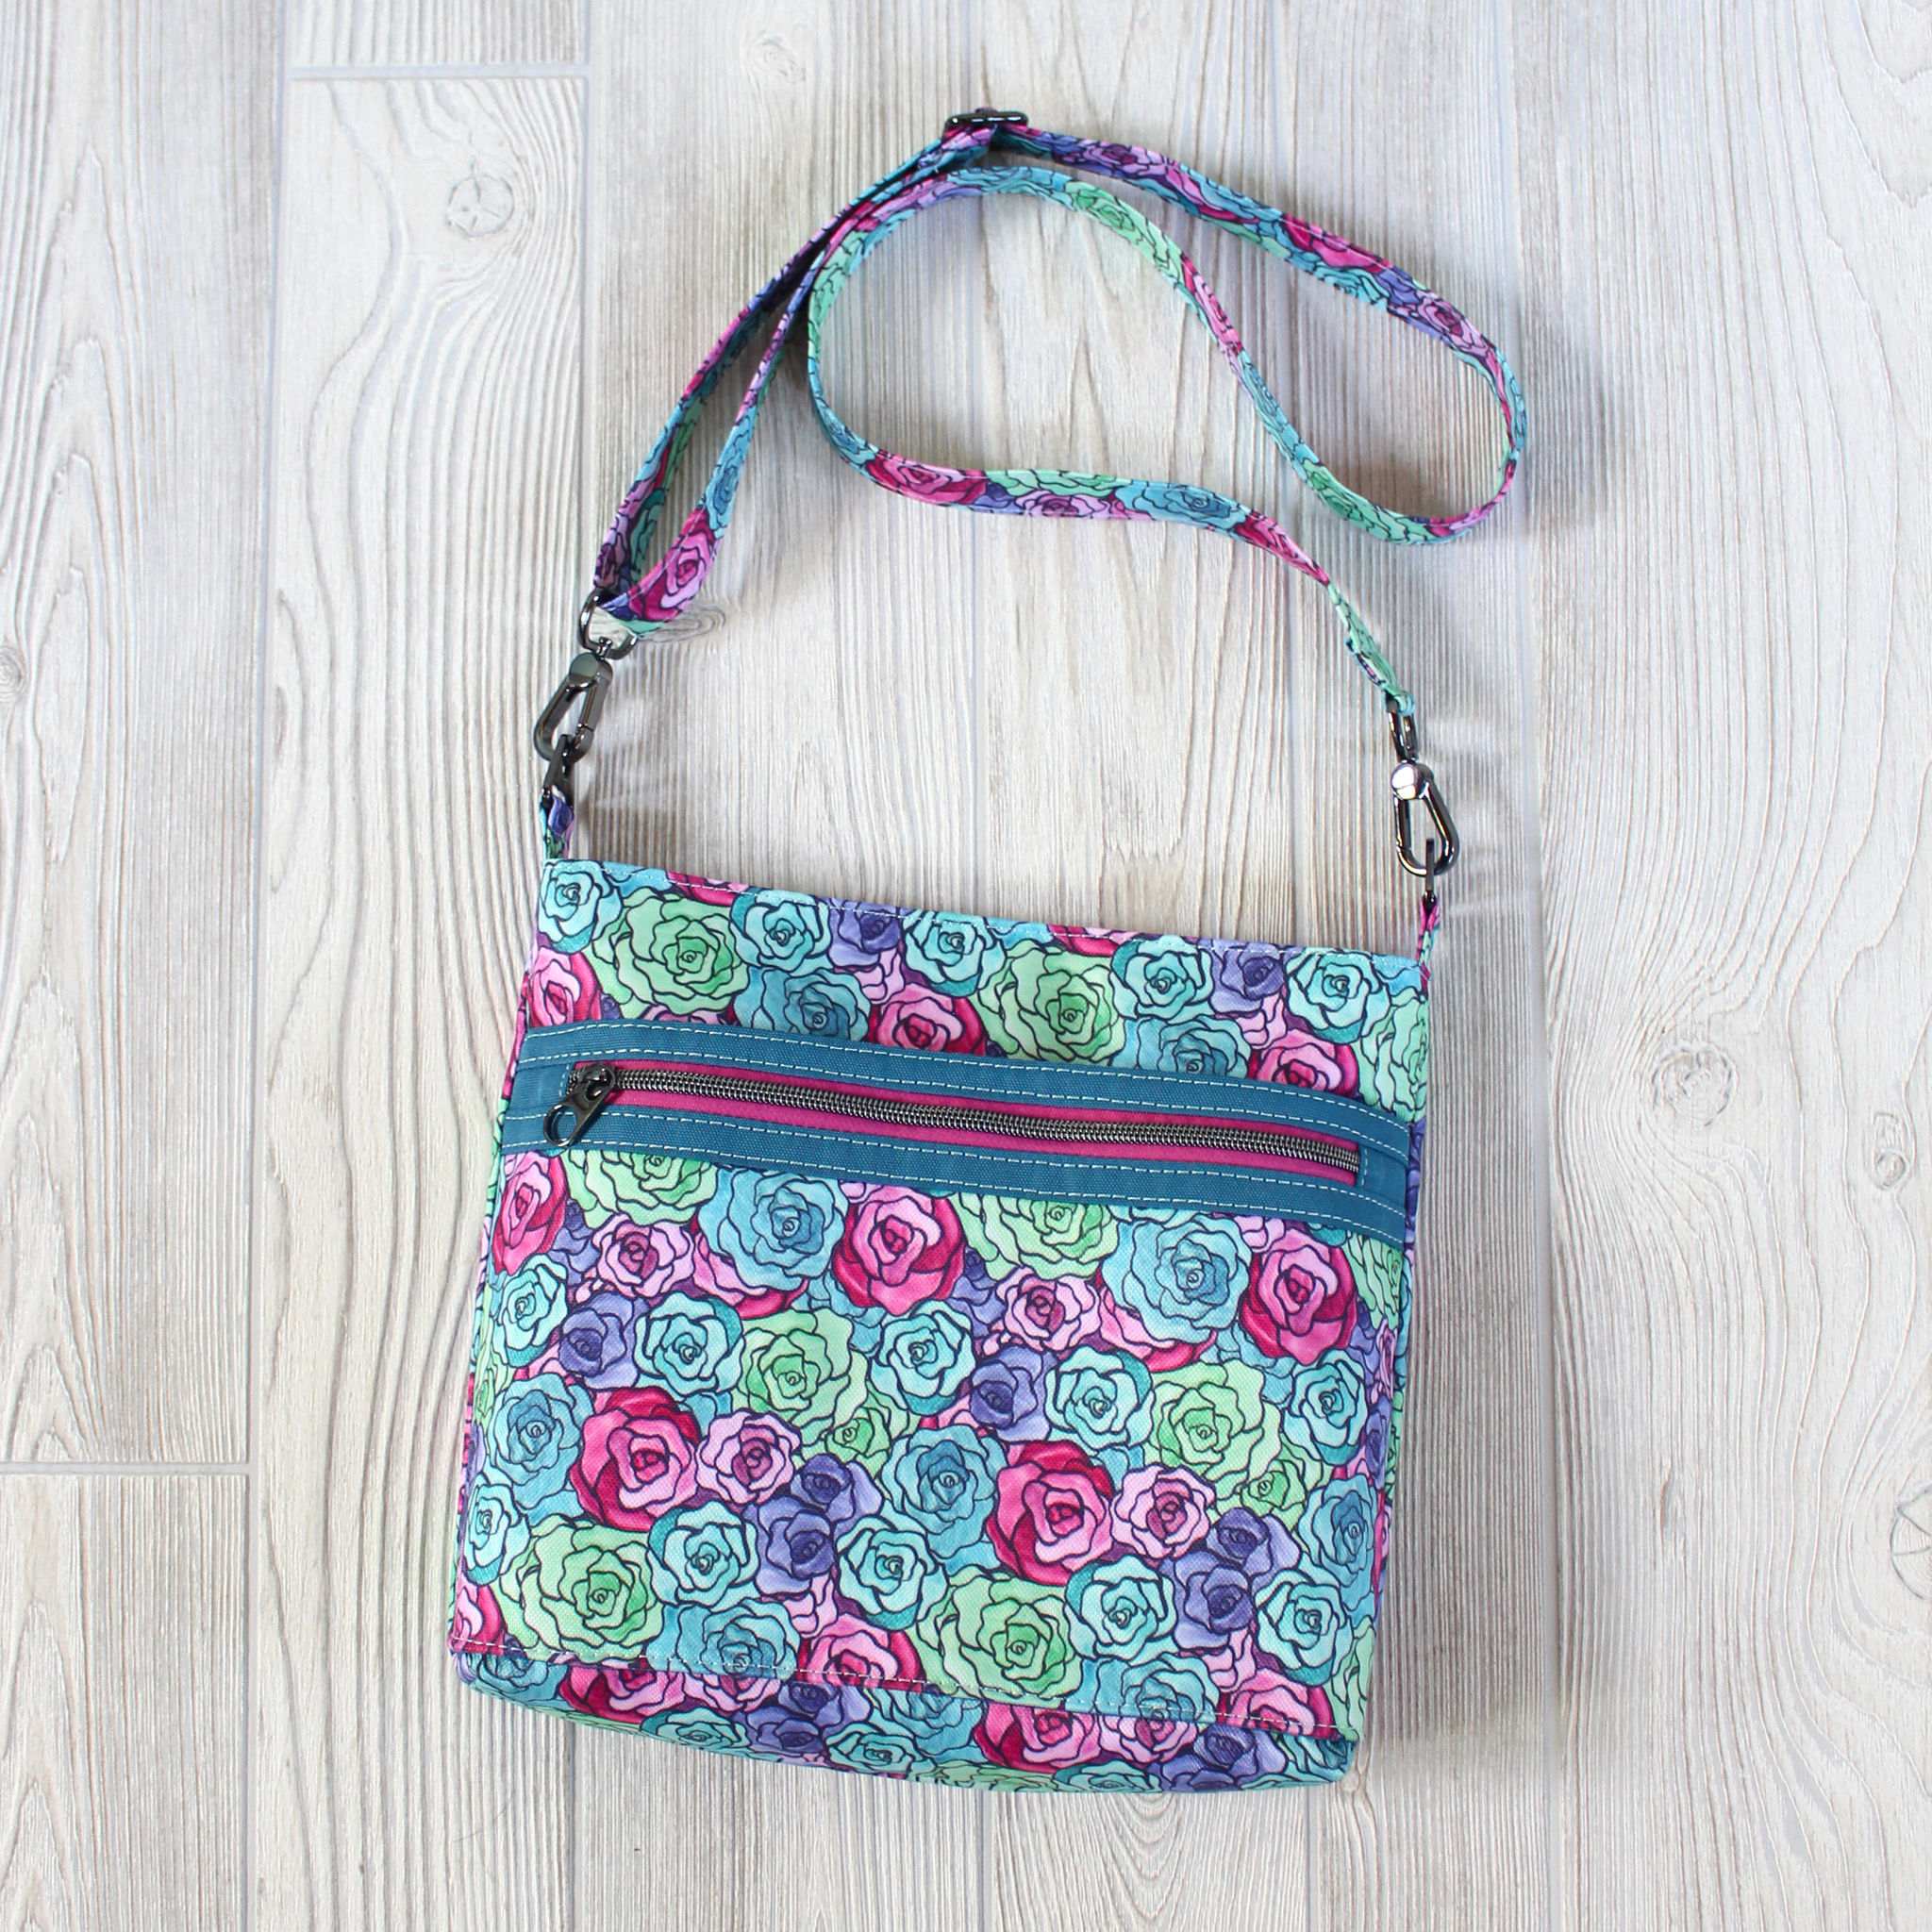 How to Sew a Crossbody Bag with Our Free Pattern